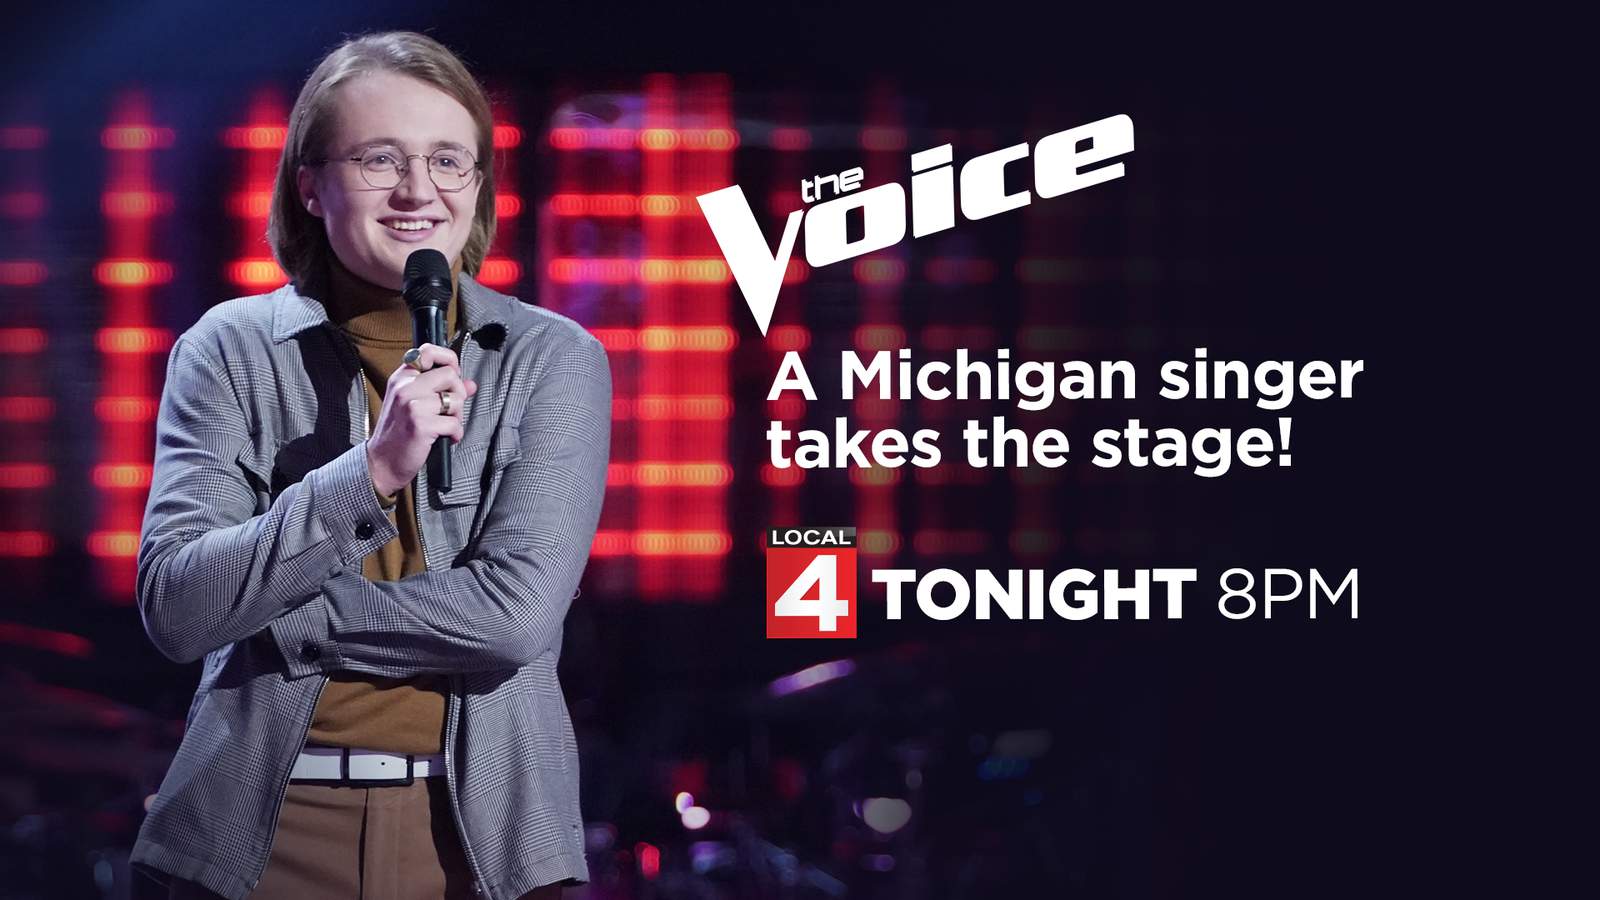 Michigan singer competes on ‘The Voice’ tonight